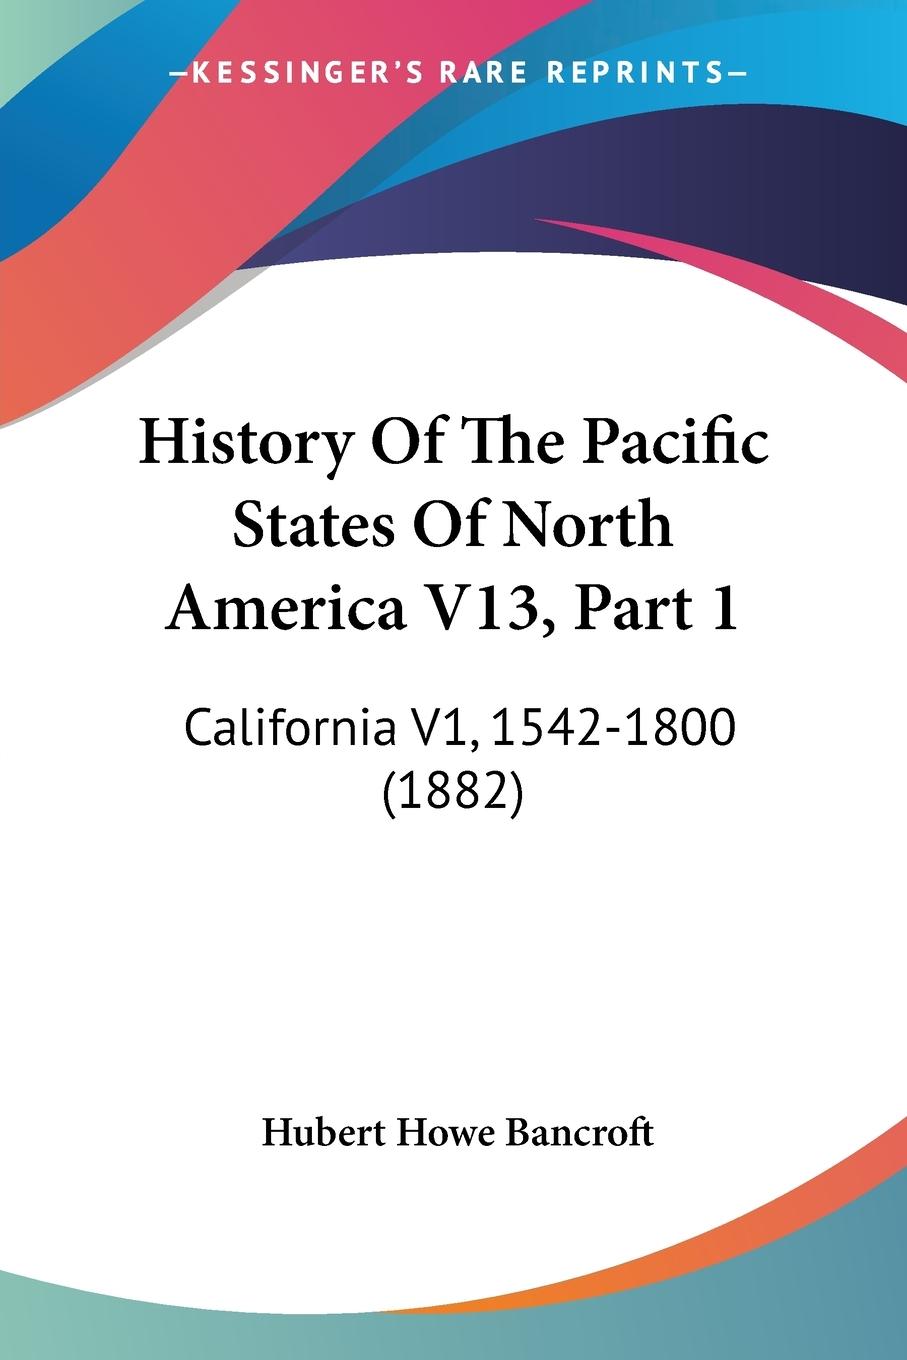 History Of The Pacific States Of North America V13, Part 1 - Bancroft, Hubert Howe